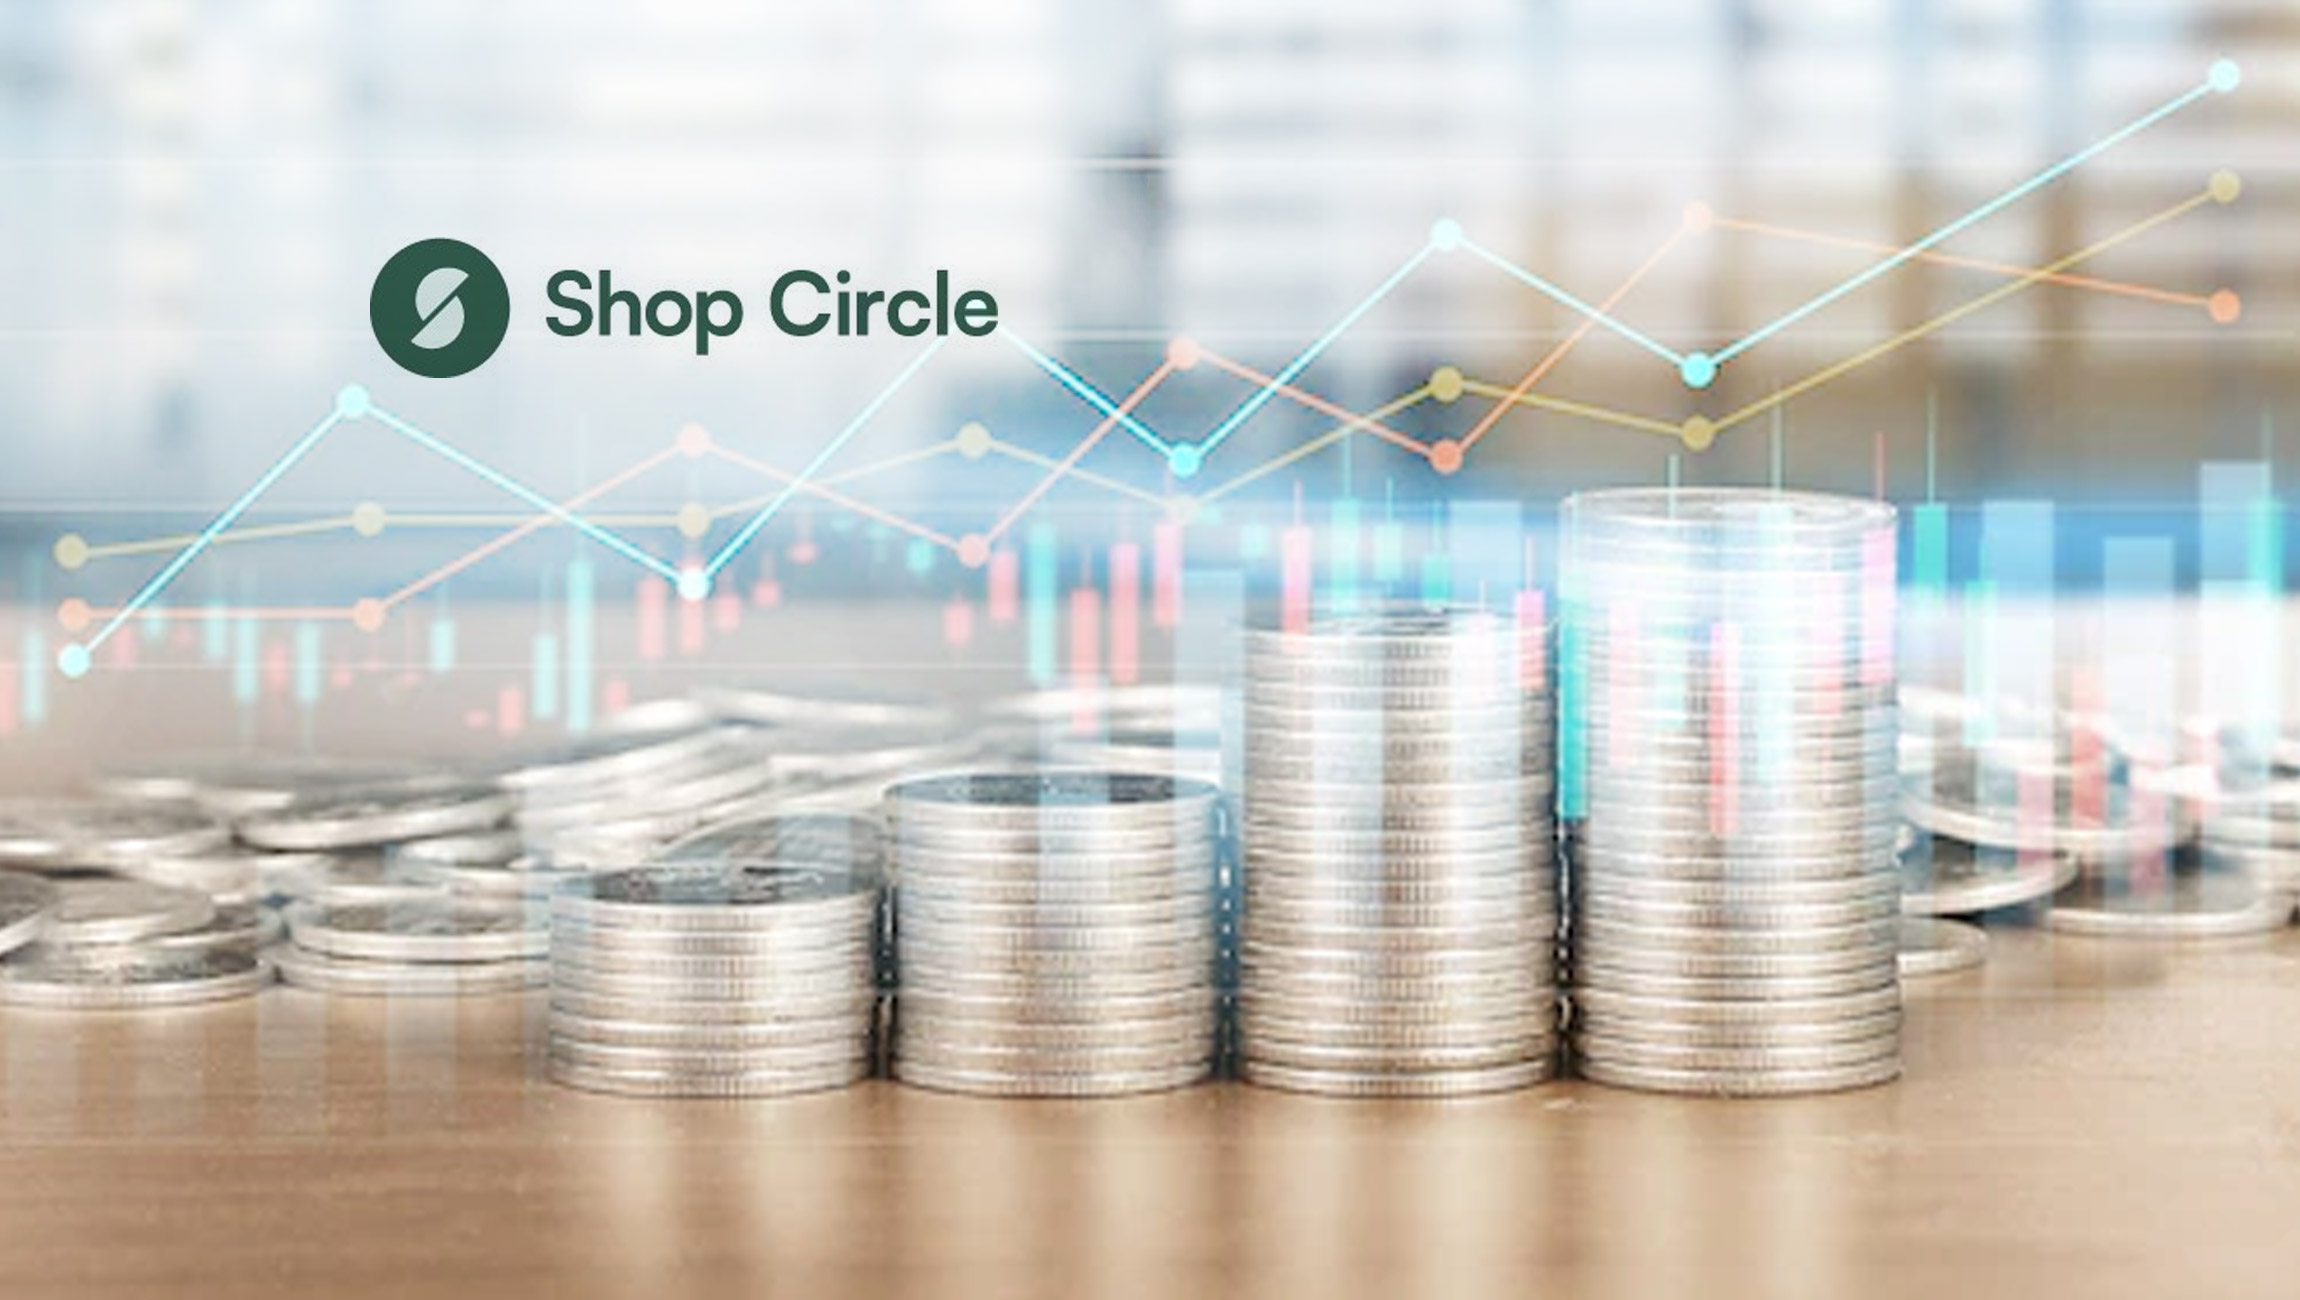 Shop Circle Exits Stealth Mode With $65 Million in Funding Led by NFX and QED to Become the First Operator of E-Commerce Tools